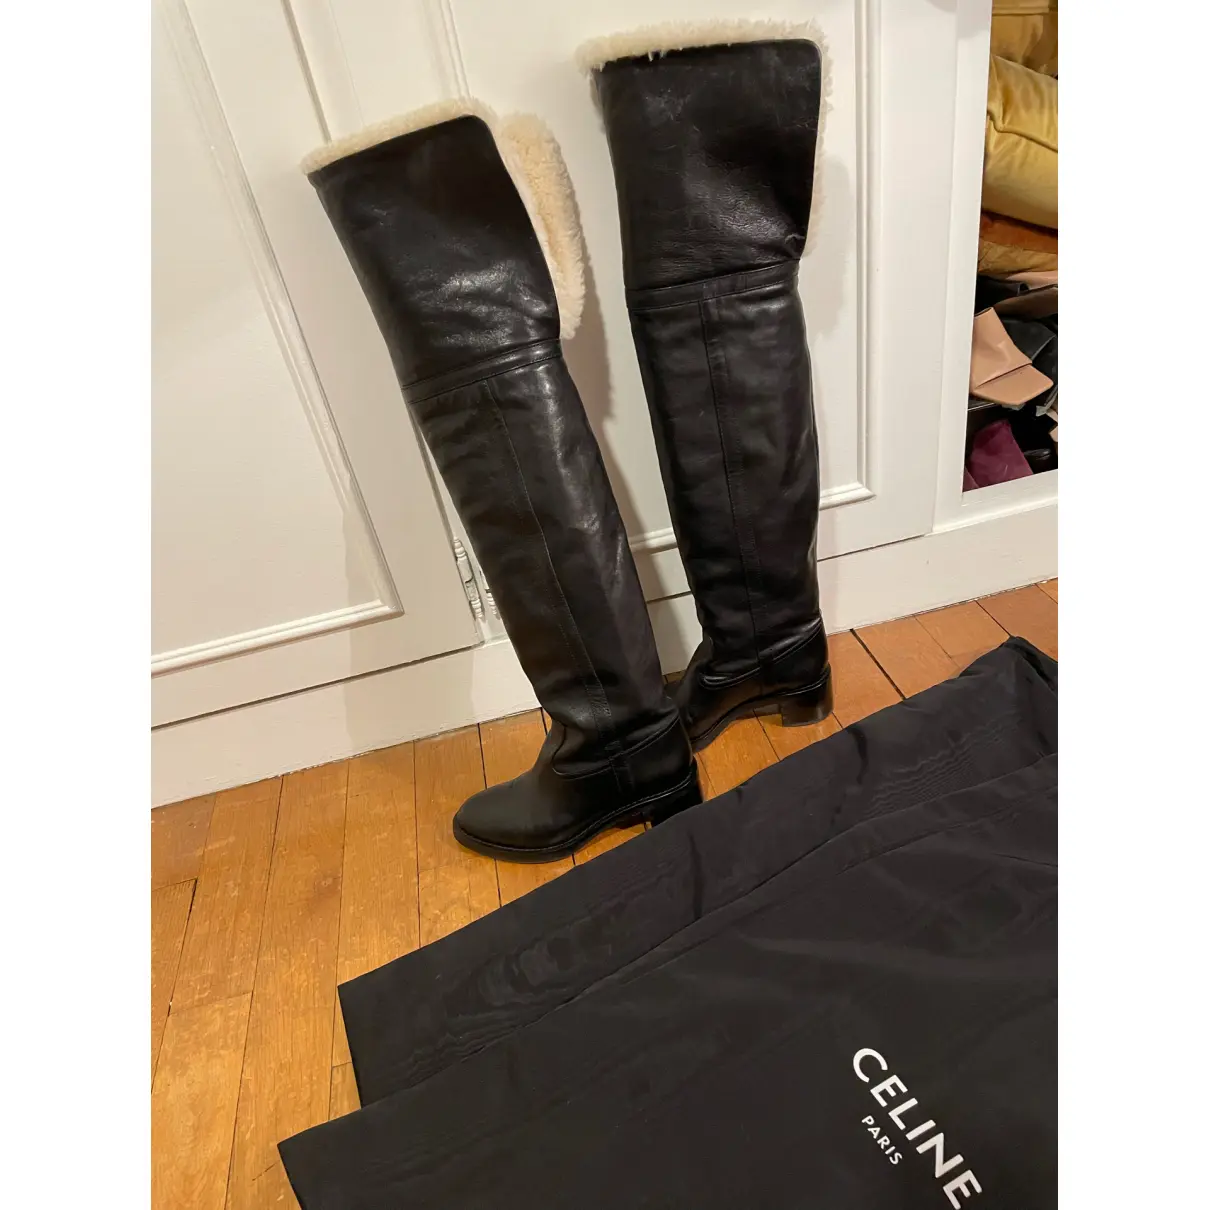 Folco shearling snow boots Celine